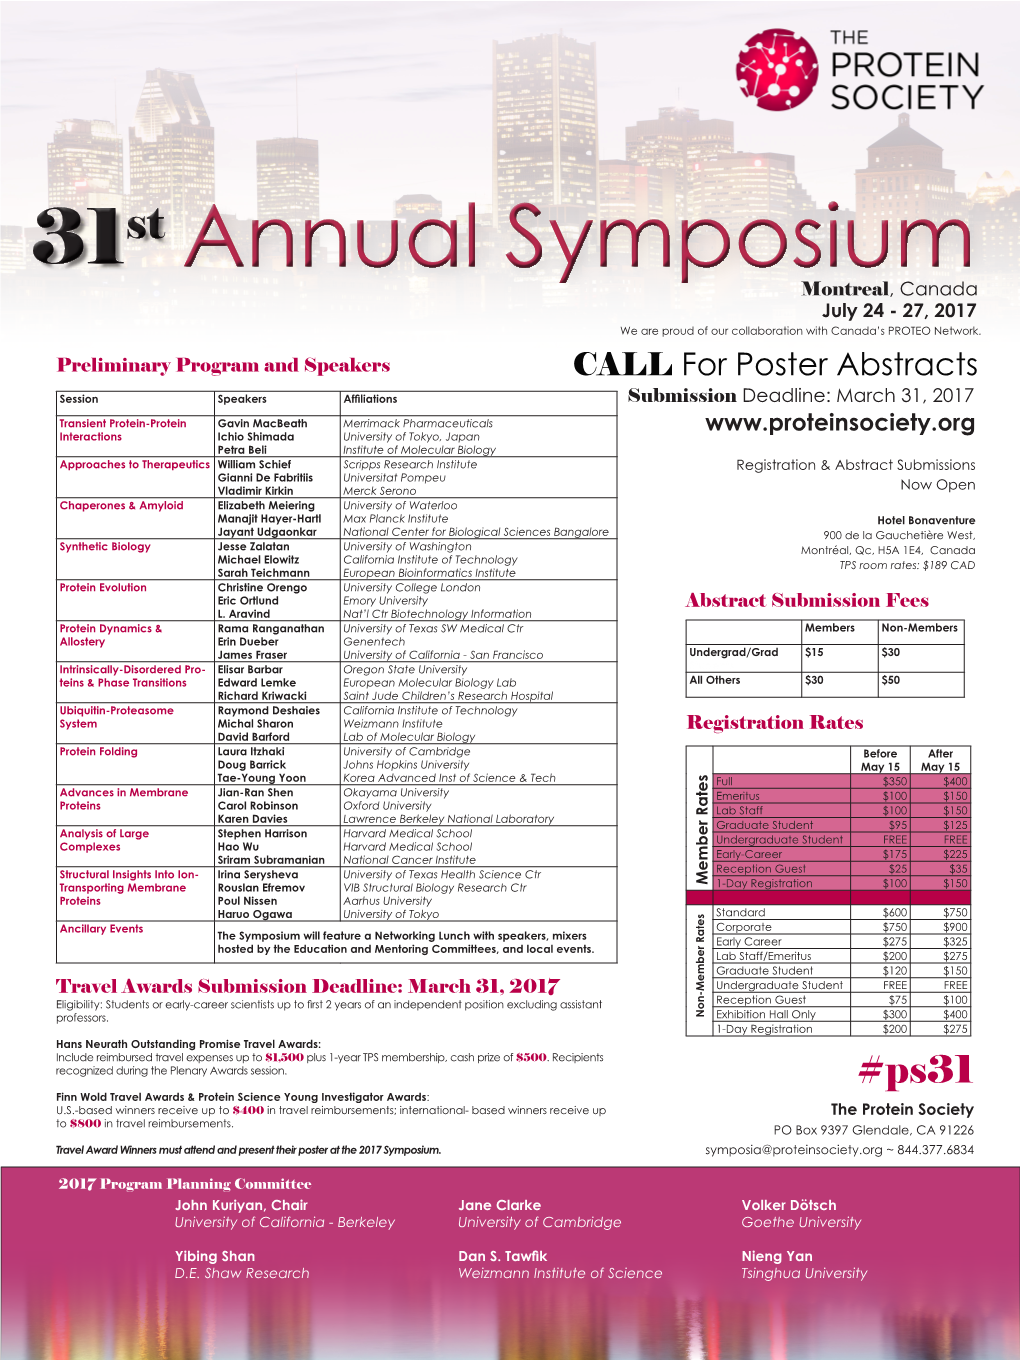 CALL for Poster Abstracts